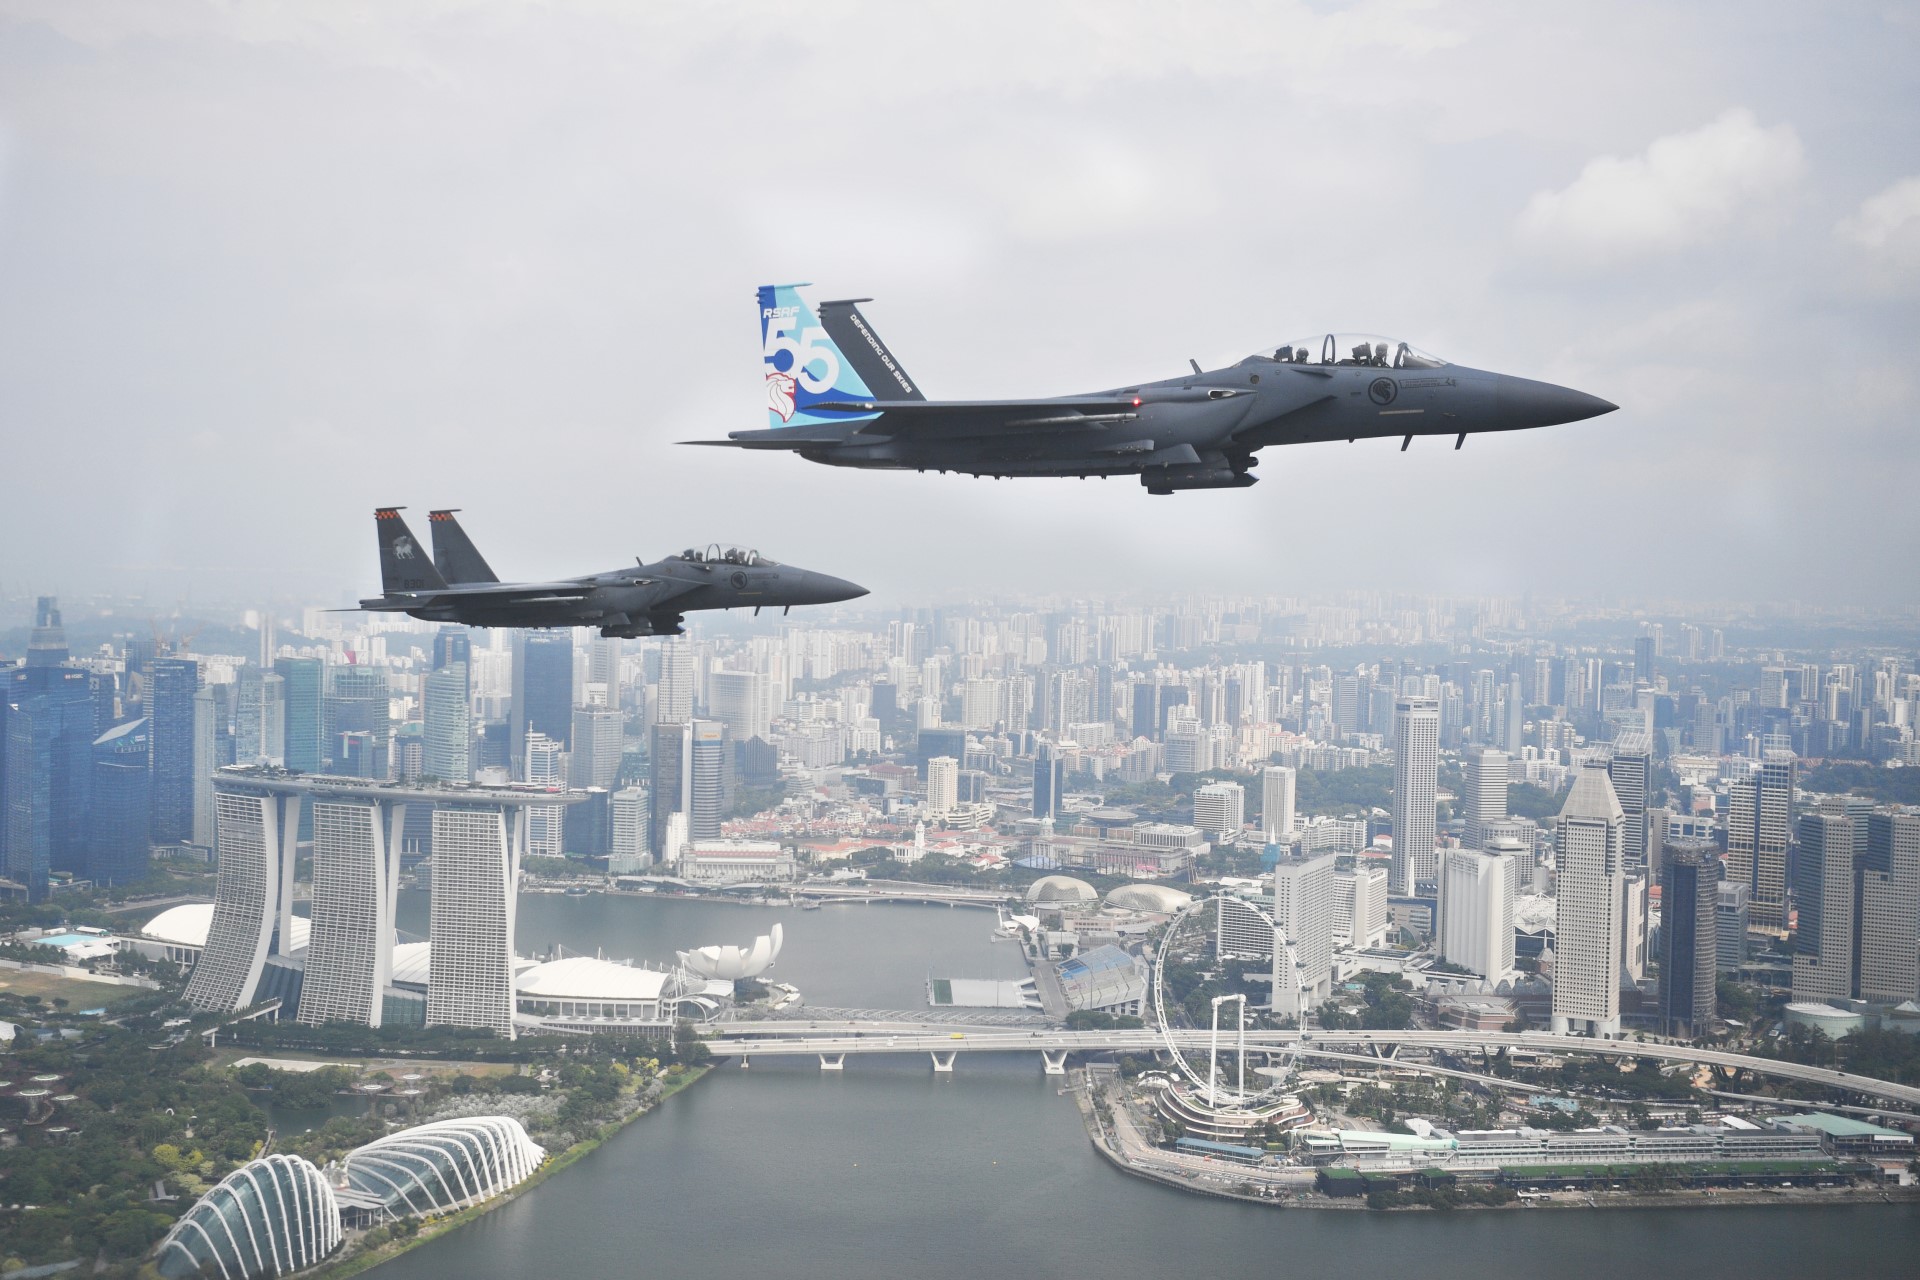 RSAF55 Open House set to wow visitors with capability display & new interactive webapp